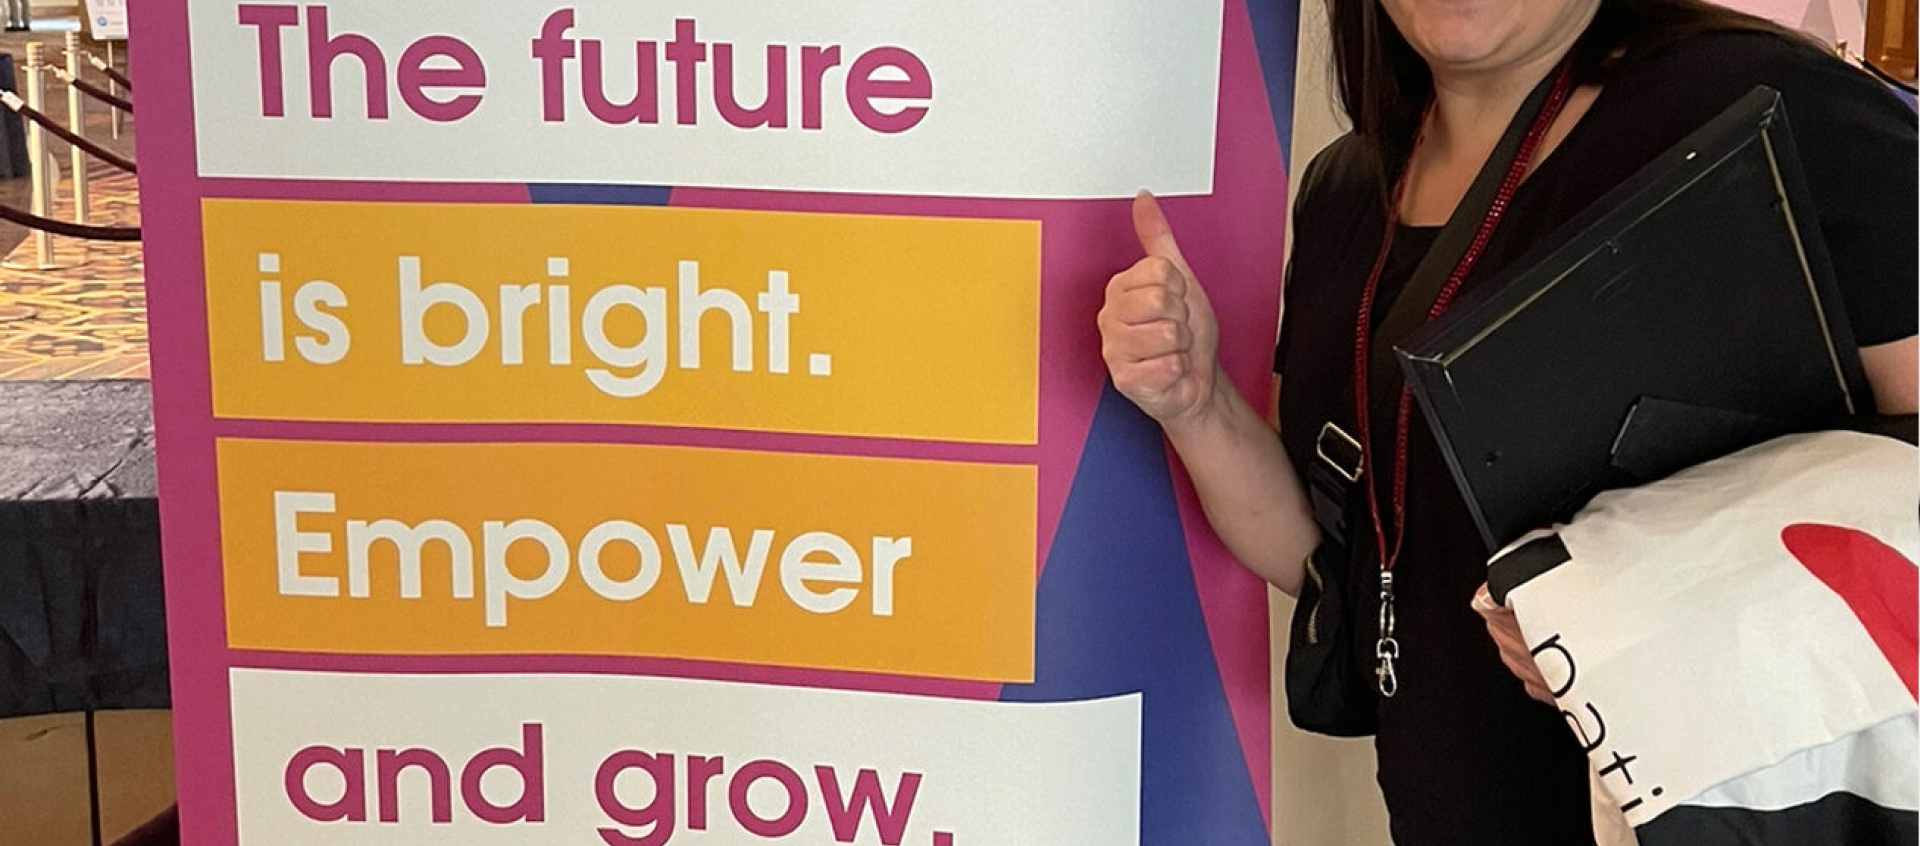 A woman is standing in front of a sign that says `` the future is bright , empower and grow ''.